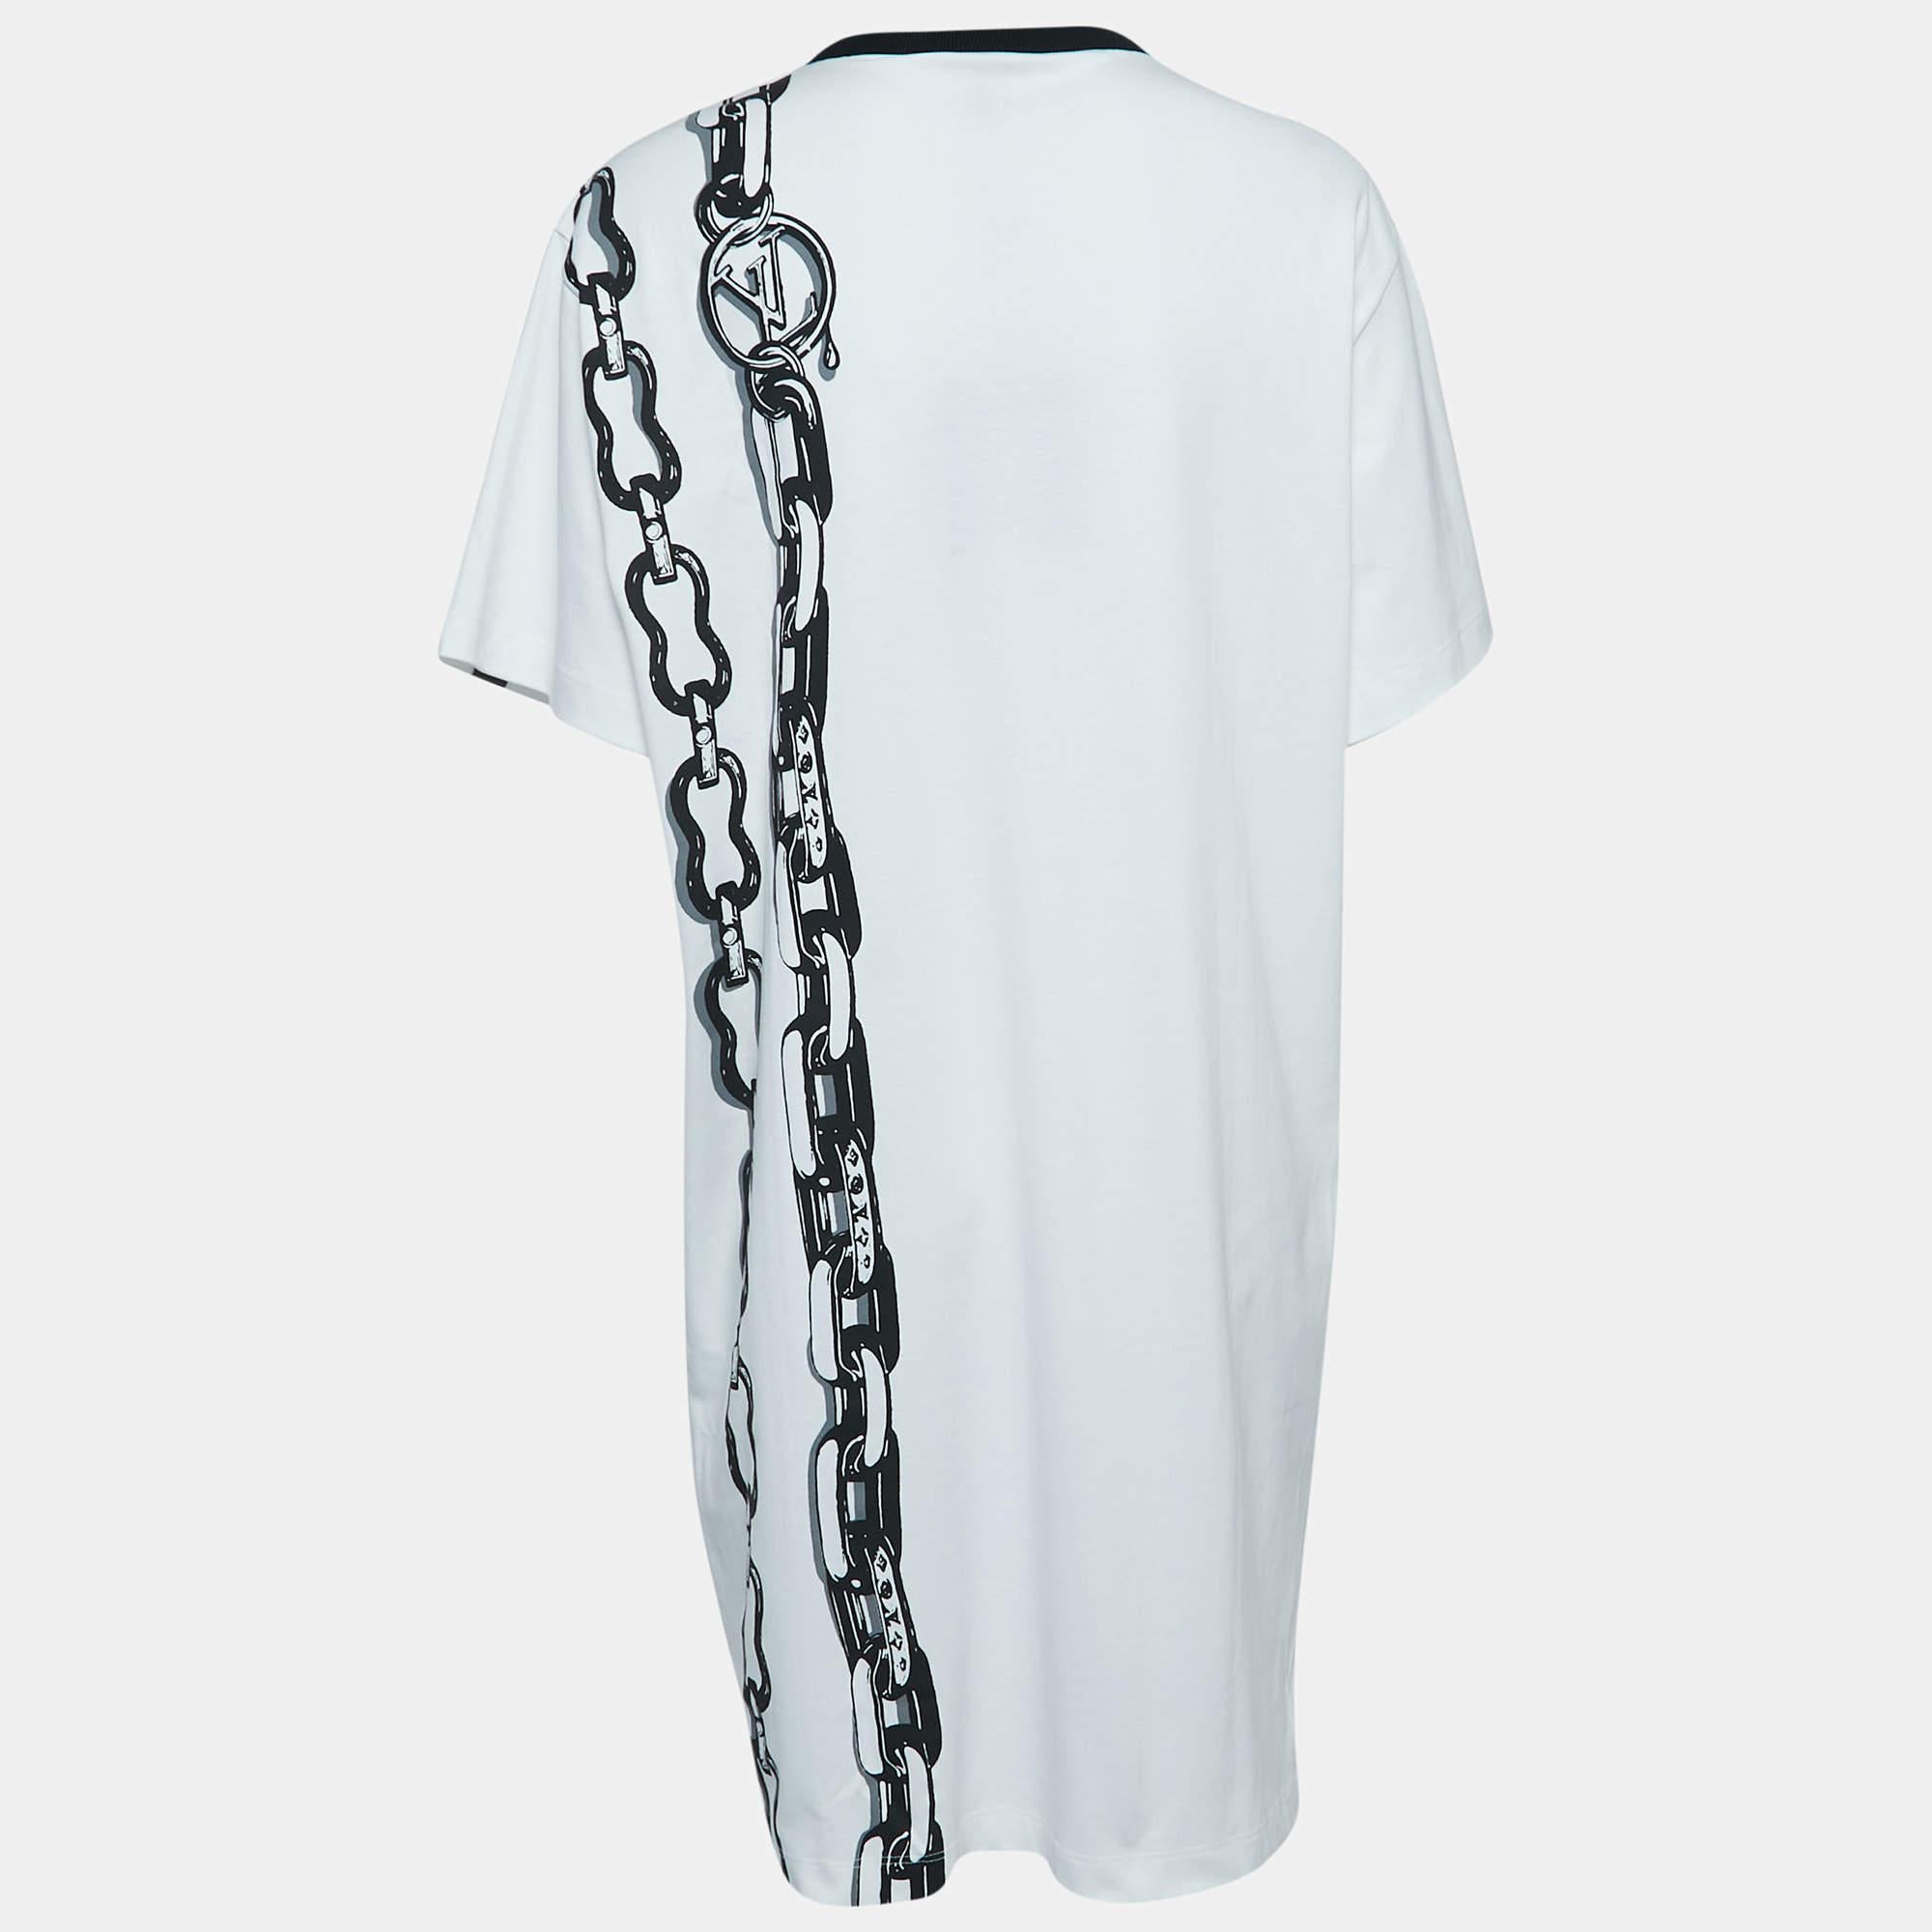 The Louis Vuitton t-shirt dress exudes luxury with its iconic chain pattern. Crafted from premium cotton, this dress features a mini length, short sleeves, and a relaxed fit, offering a perfect blend of comfort and high-end fashion in a chic and